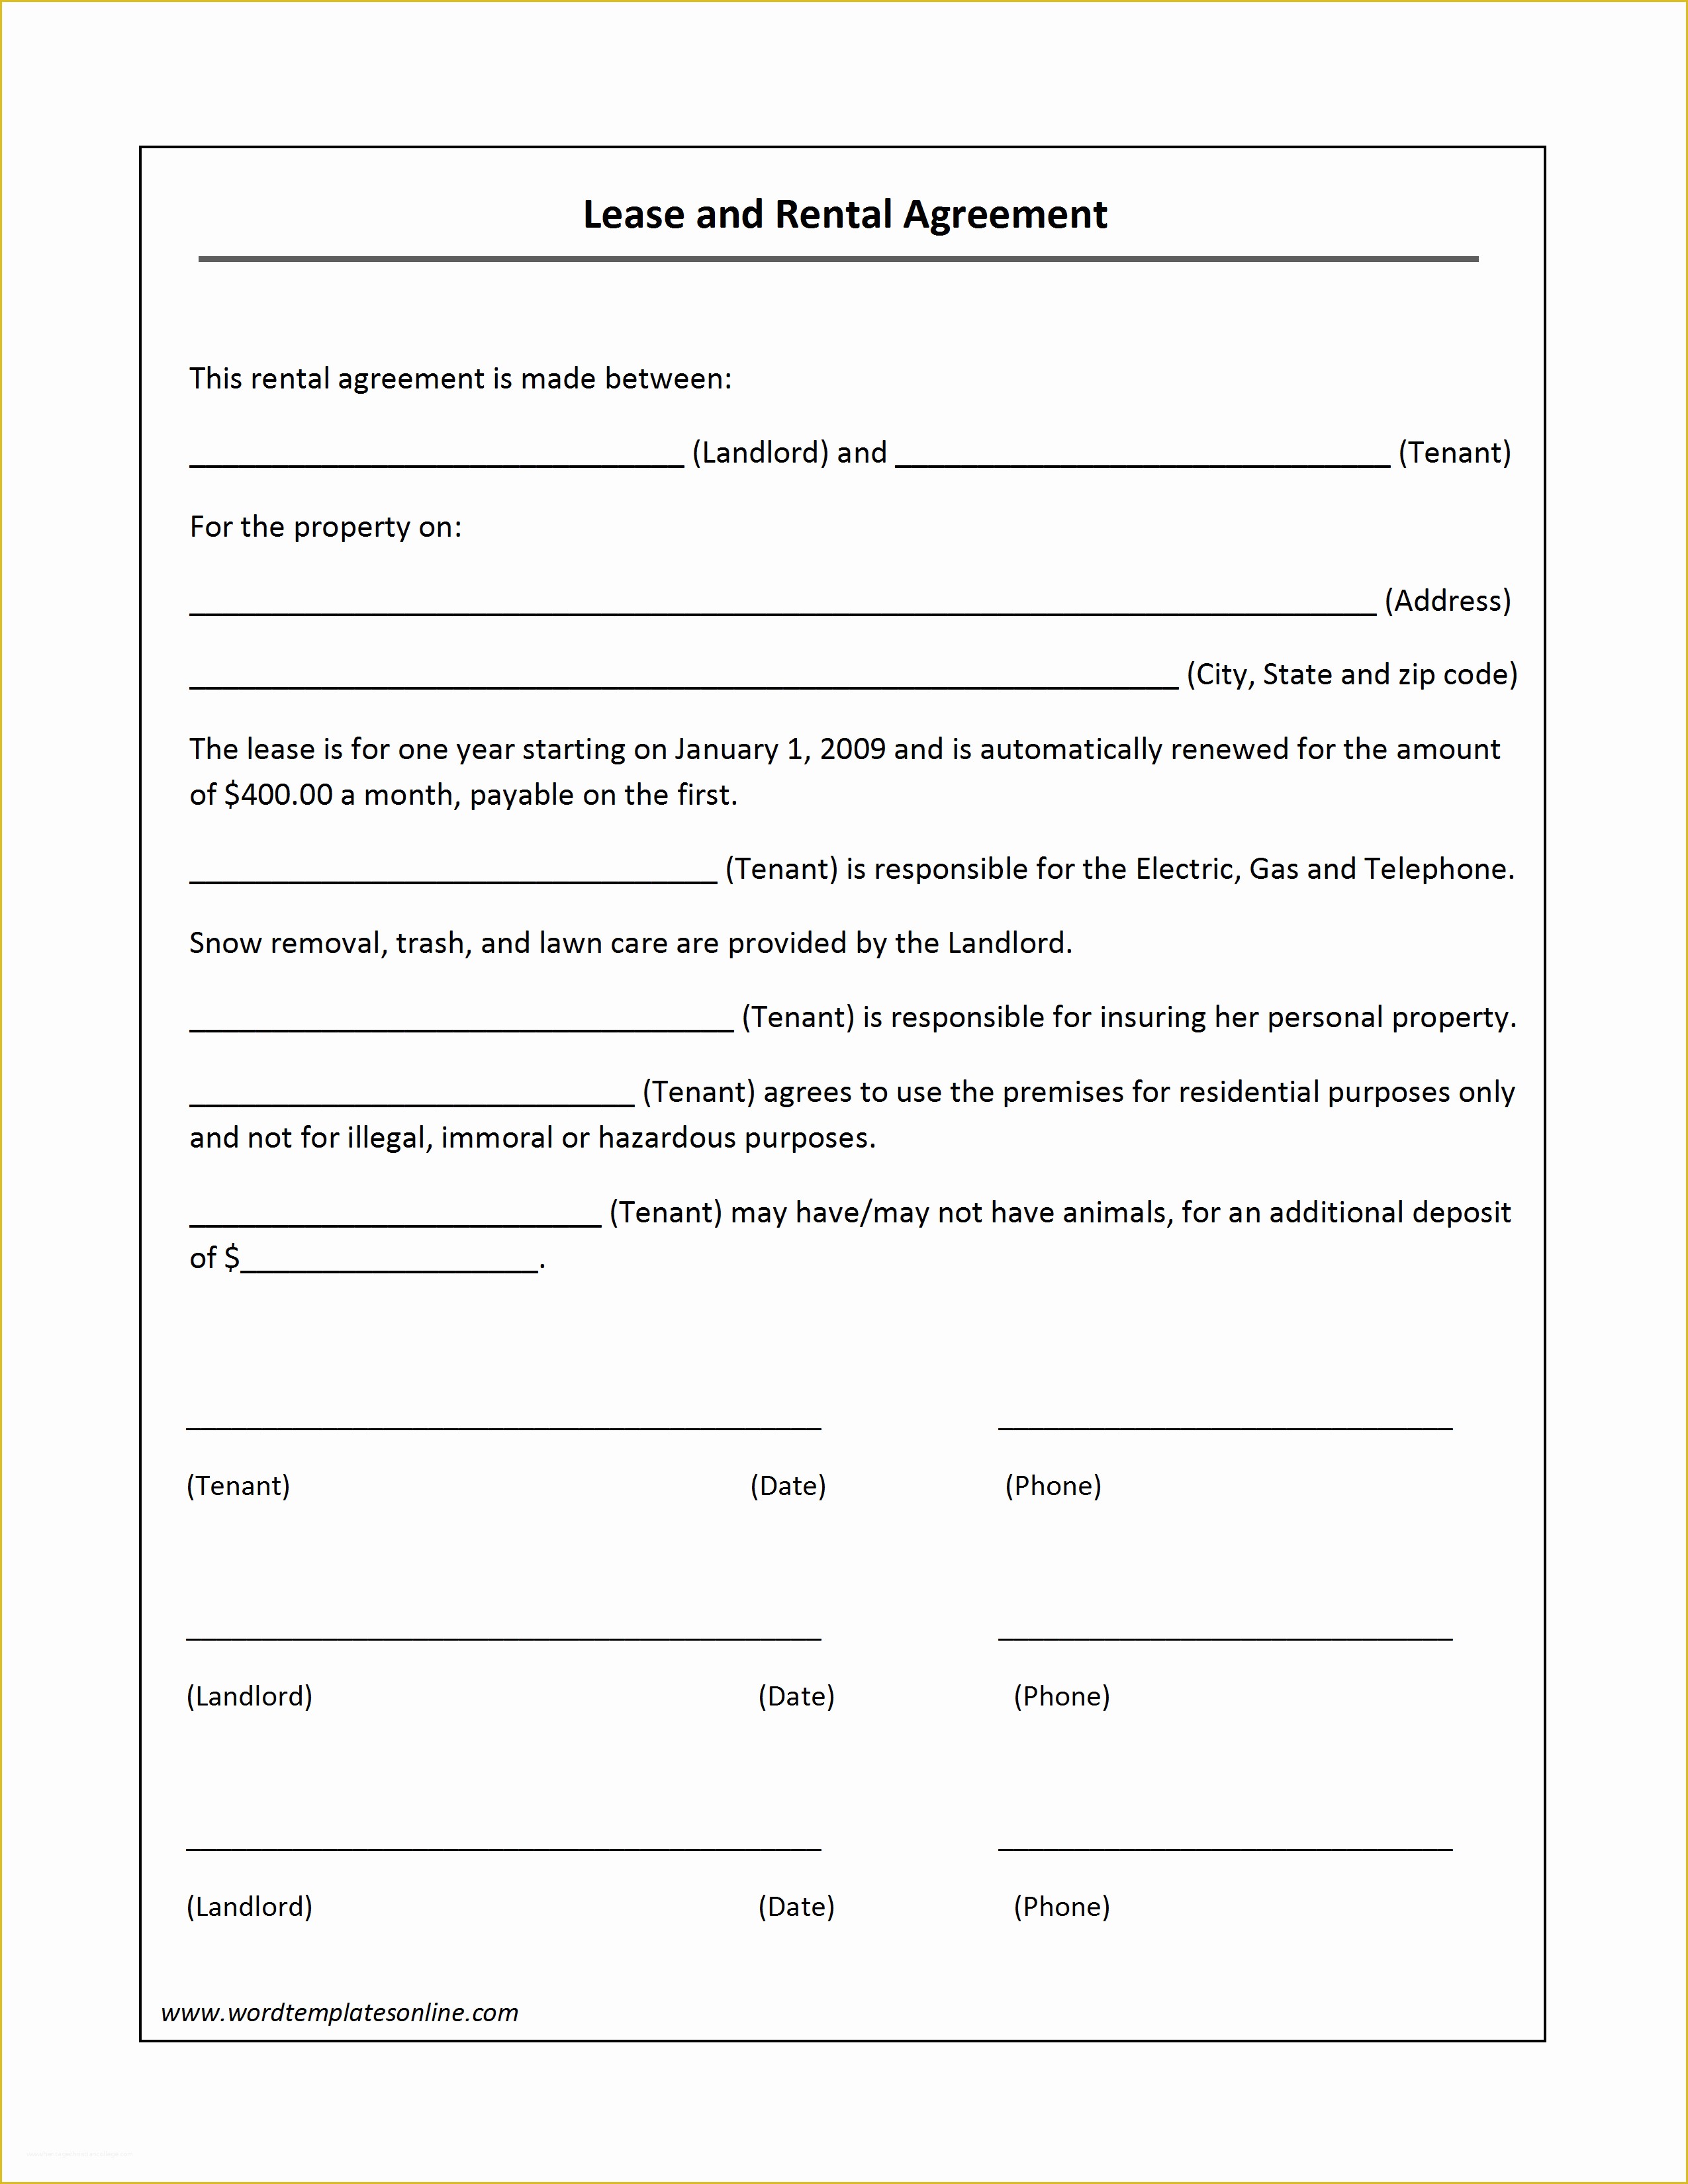 Lease Agreement Template Free Of Generic Rental Contract Portablegasgrillweber